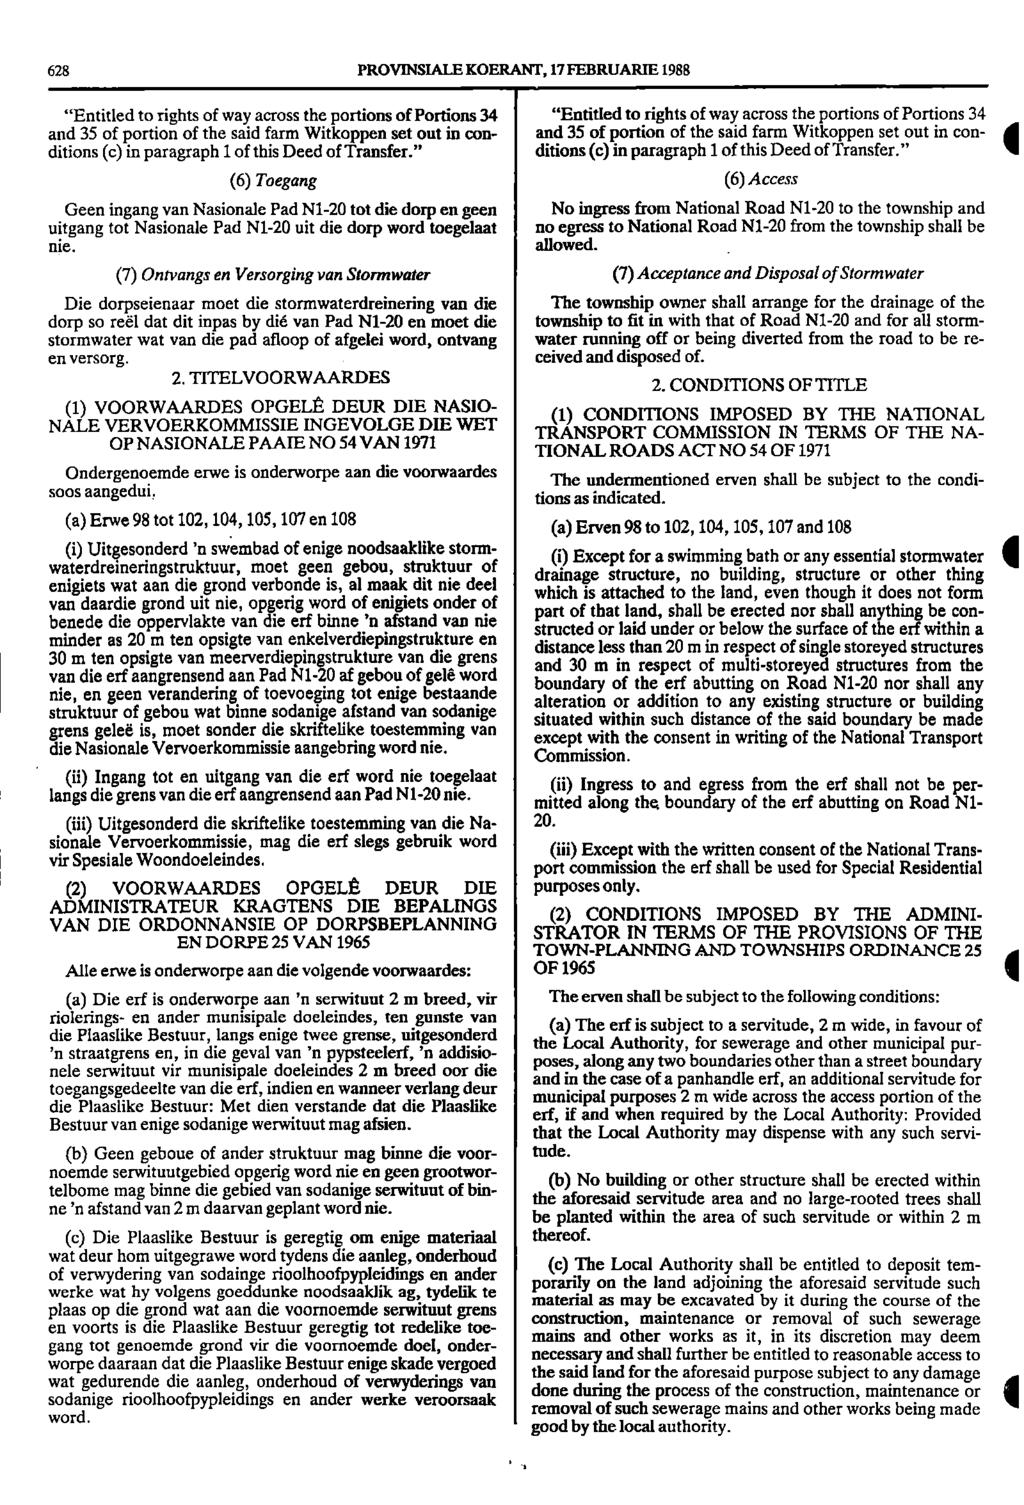 628 PROVINSIALE KOERANT, 17 FEBRUARIE 1988 "Entitled to rights of way across the portions of Portions 3 "Entitled to rights of way across the portions of Portions 3 and 35 of portion of the said farm